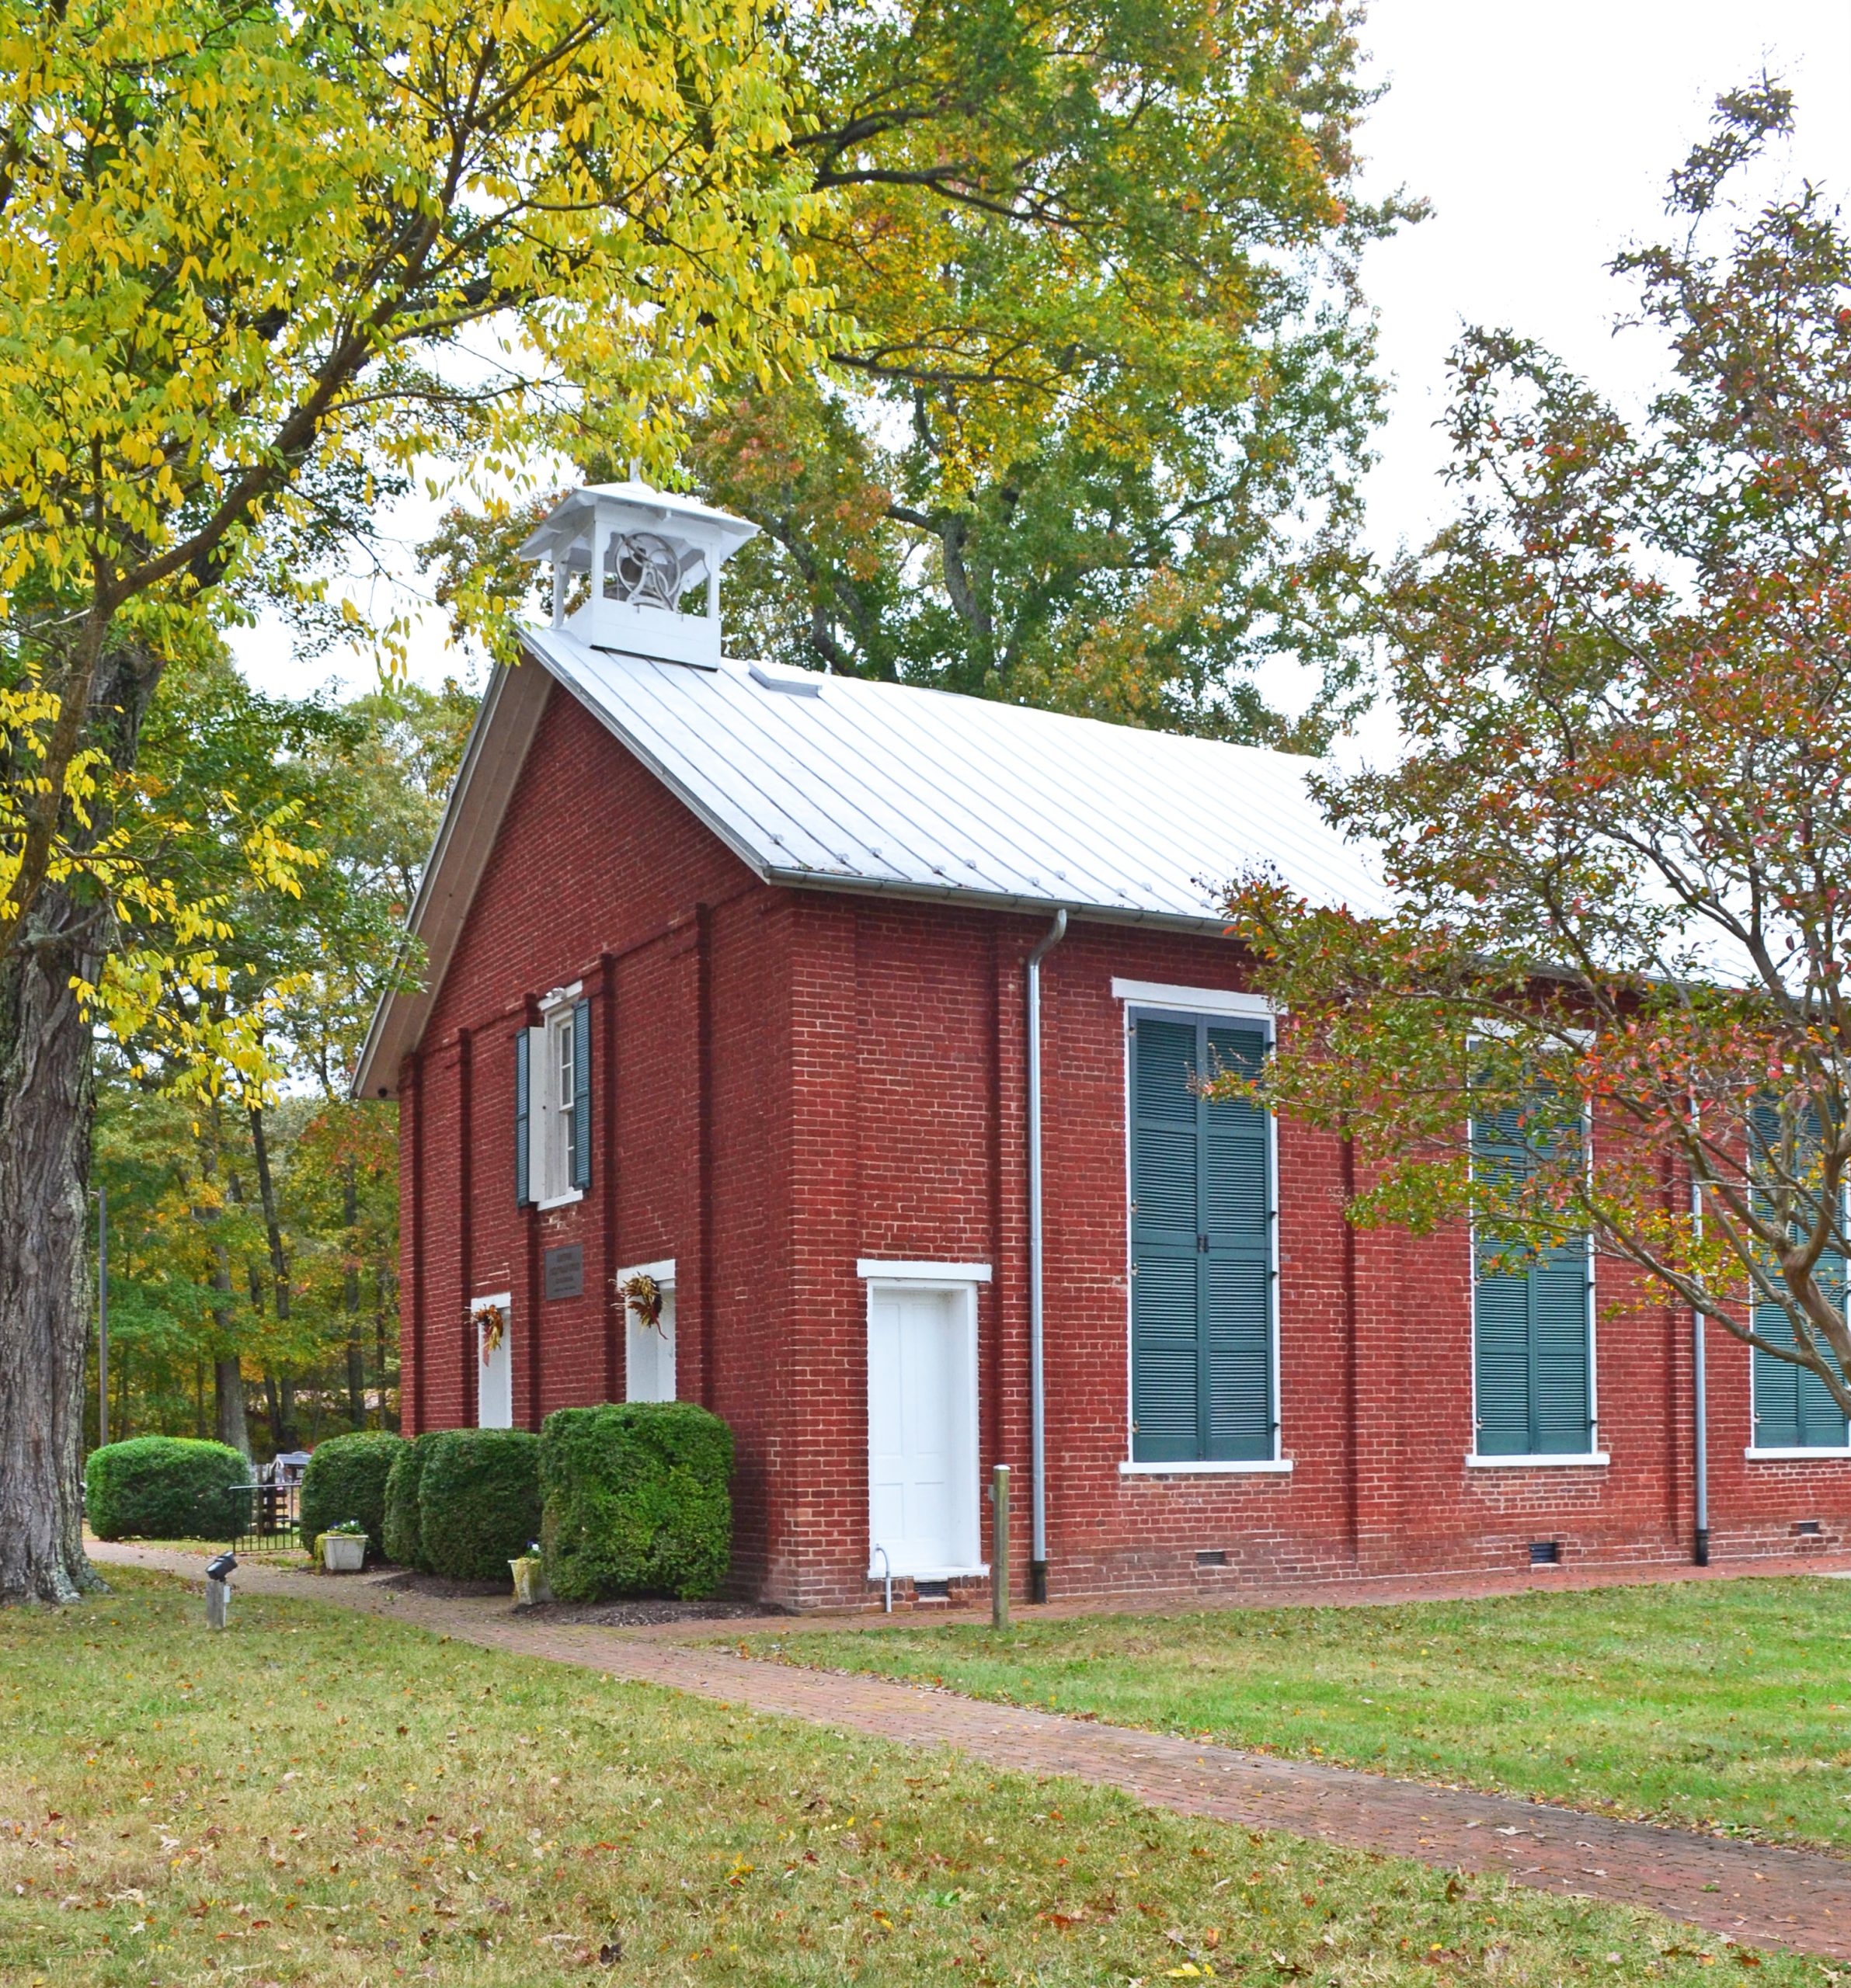 089-0082_Hartwood_Presbyterian_Church_2021_exterior_front_oblique_VLR_Online-scaled